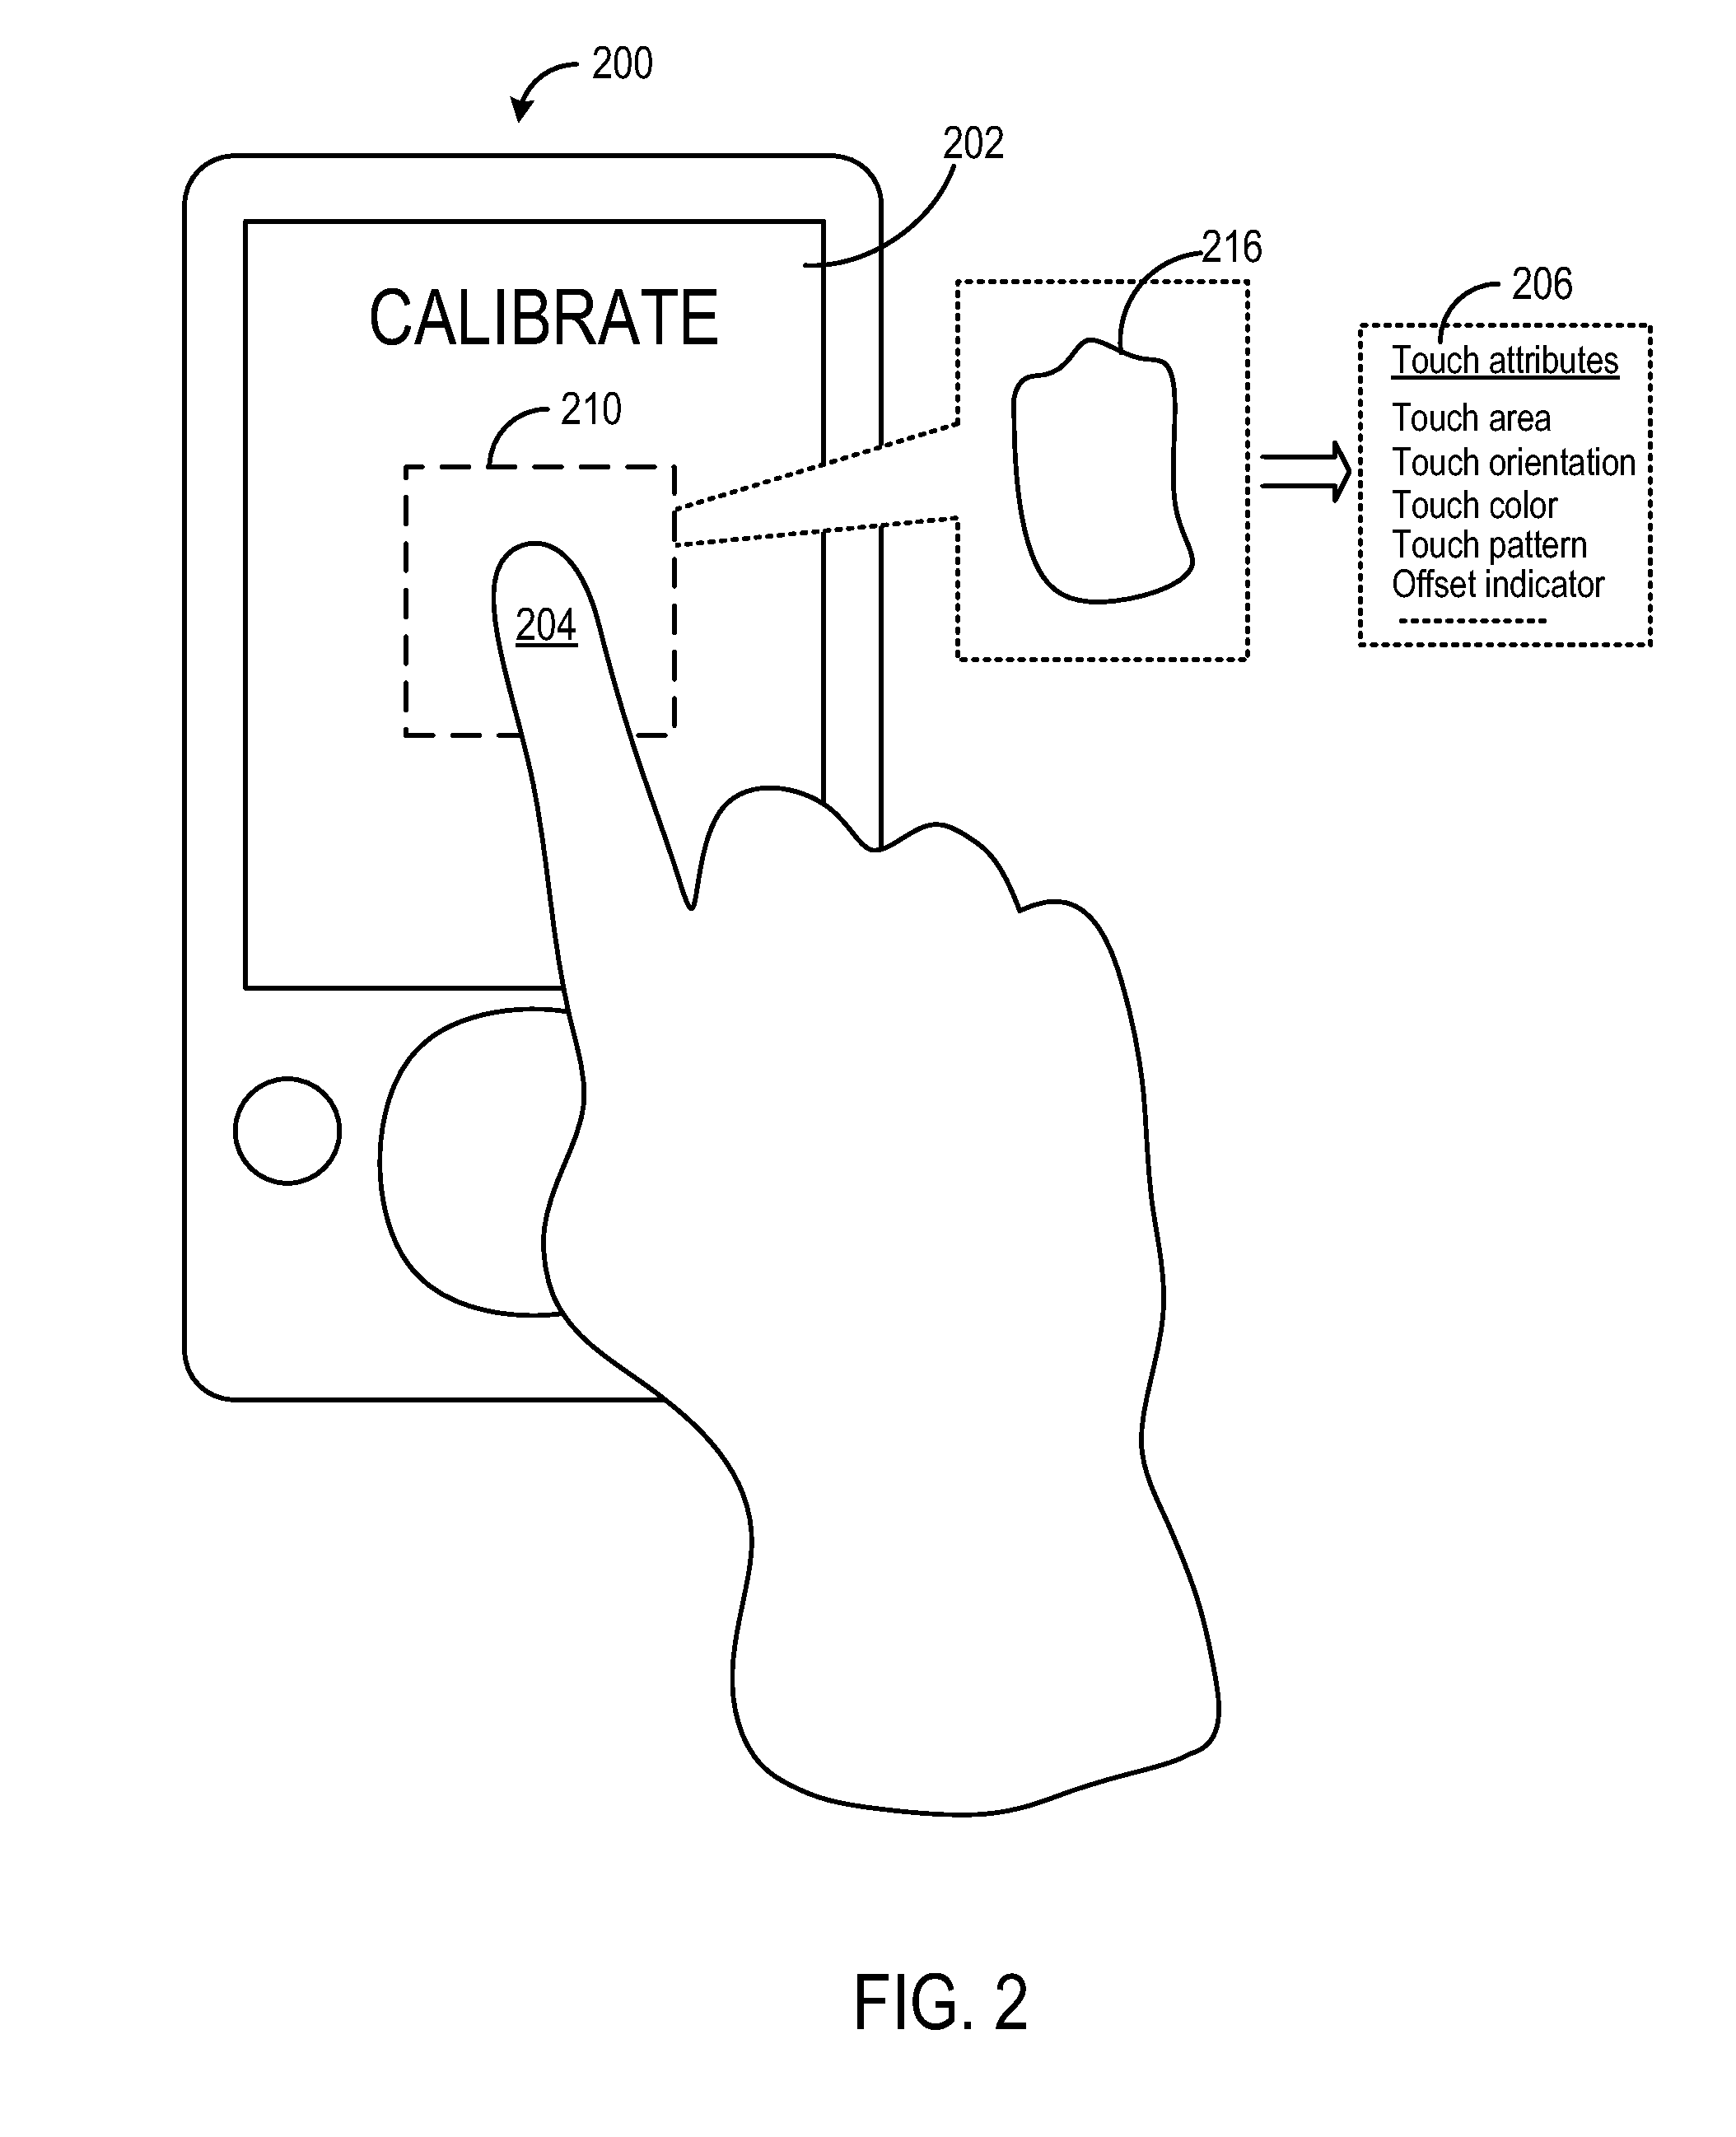 Touch personalization for a display device